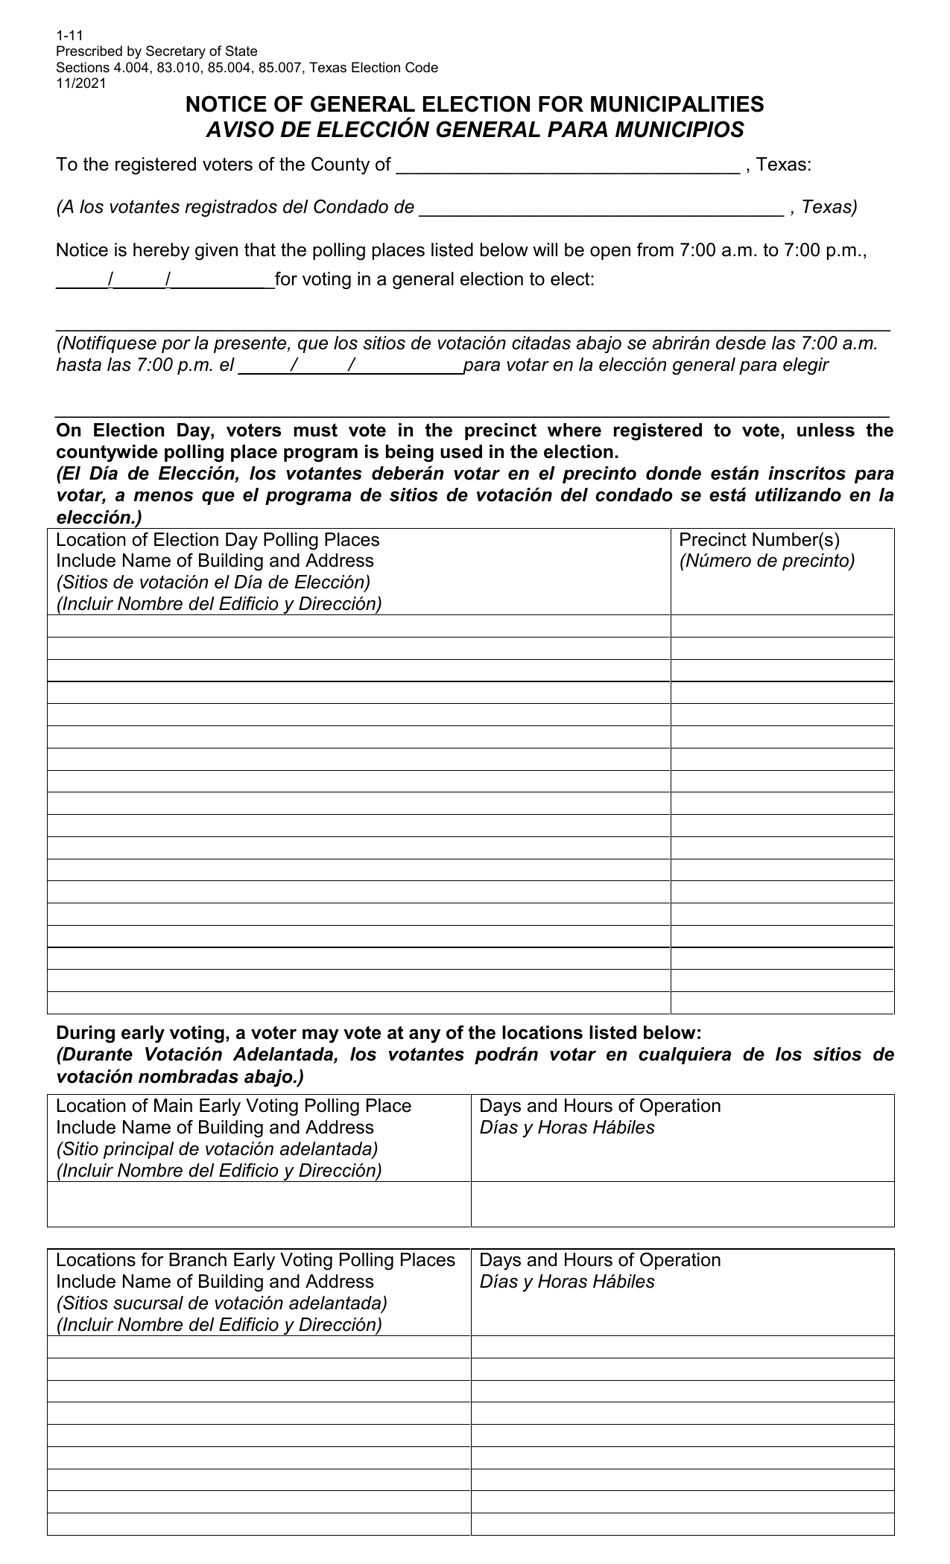 Form 1-11 Notice of General Election for Municipalities - Texas (English / Spanish), Page 1